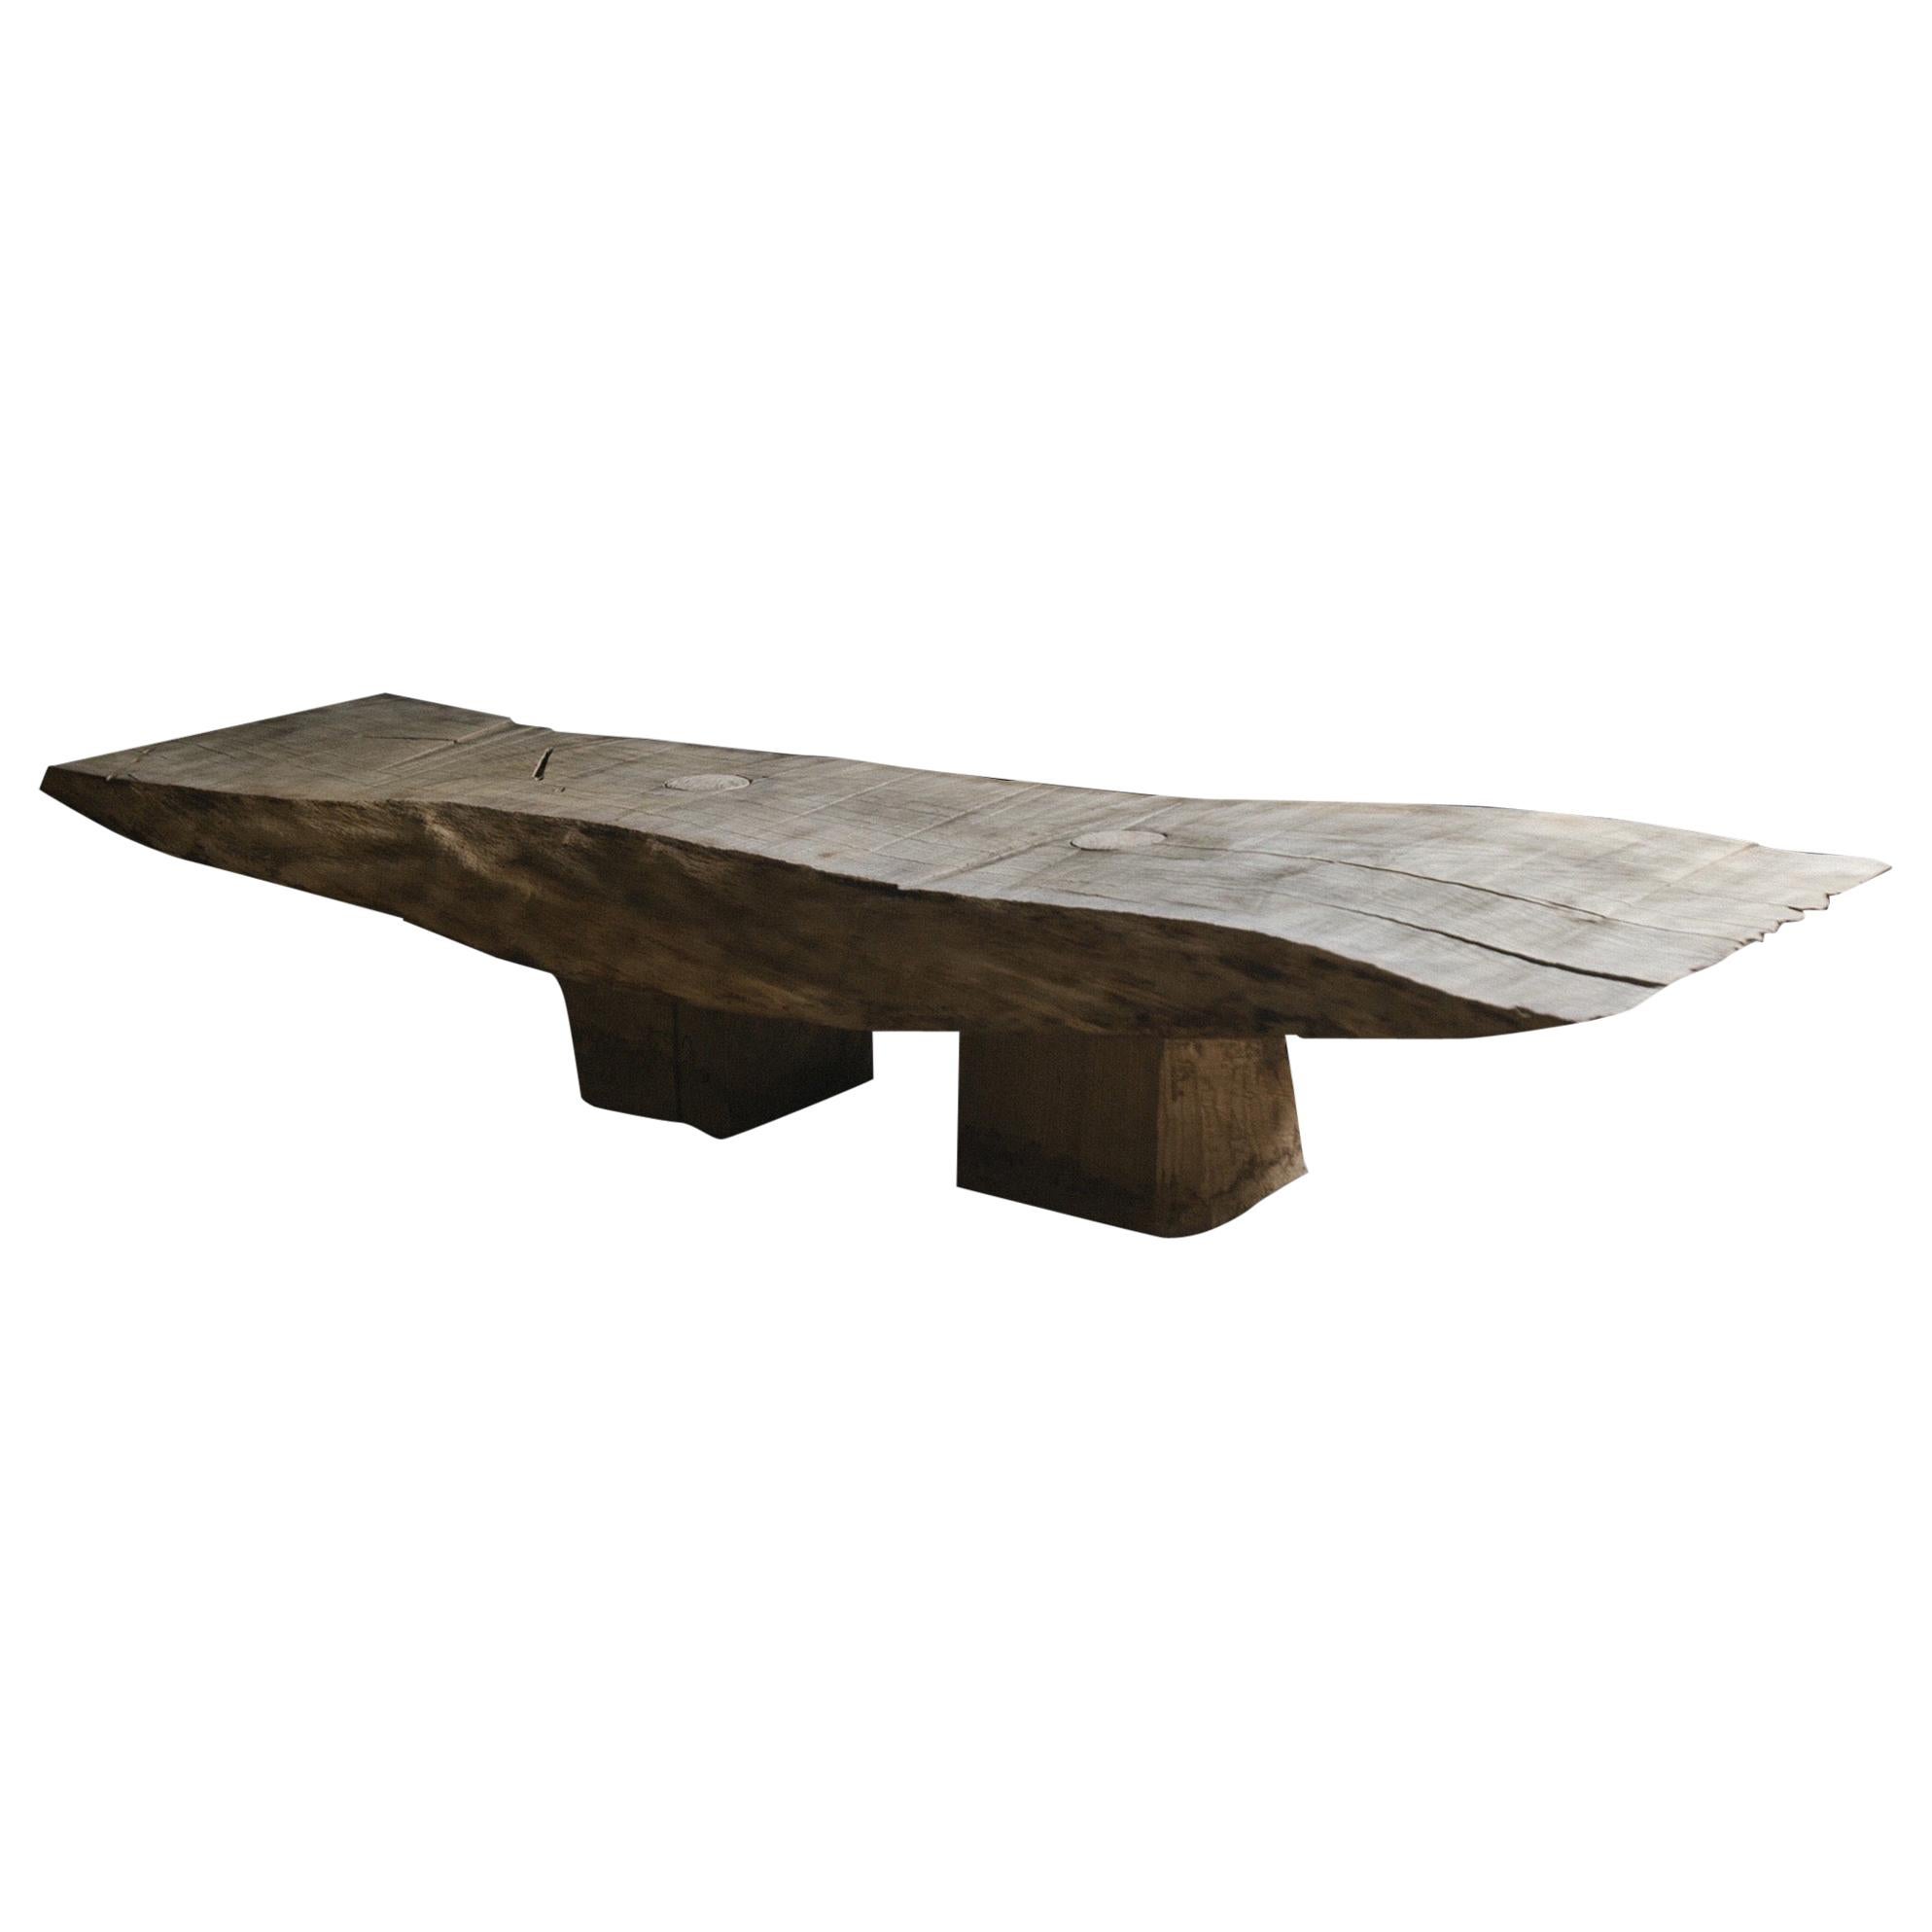 Contemporary Brutalist Style Bench or Low Table in Solid Oak and Linseed Oil